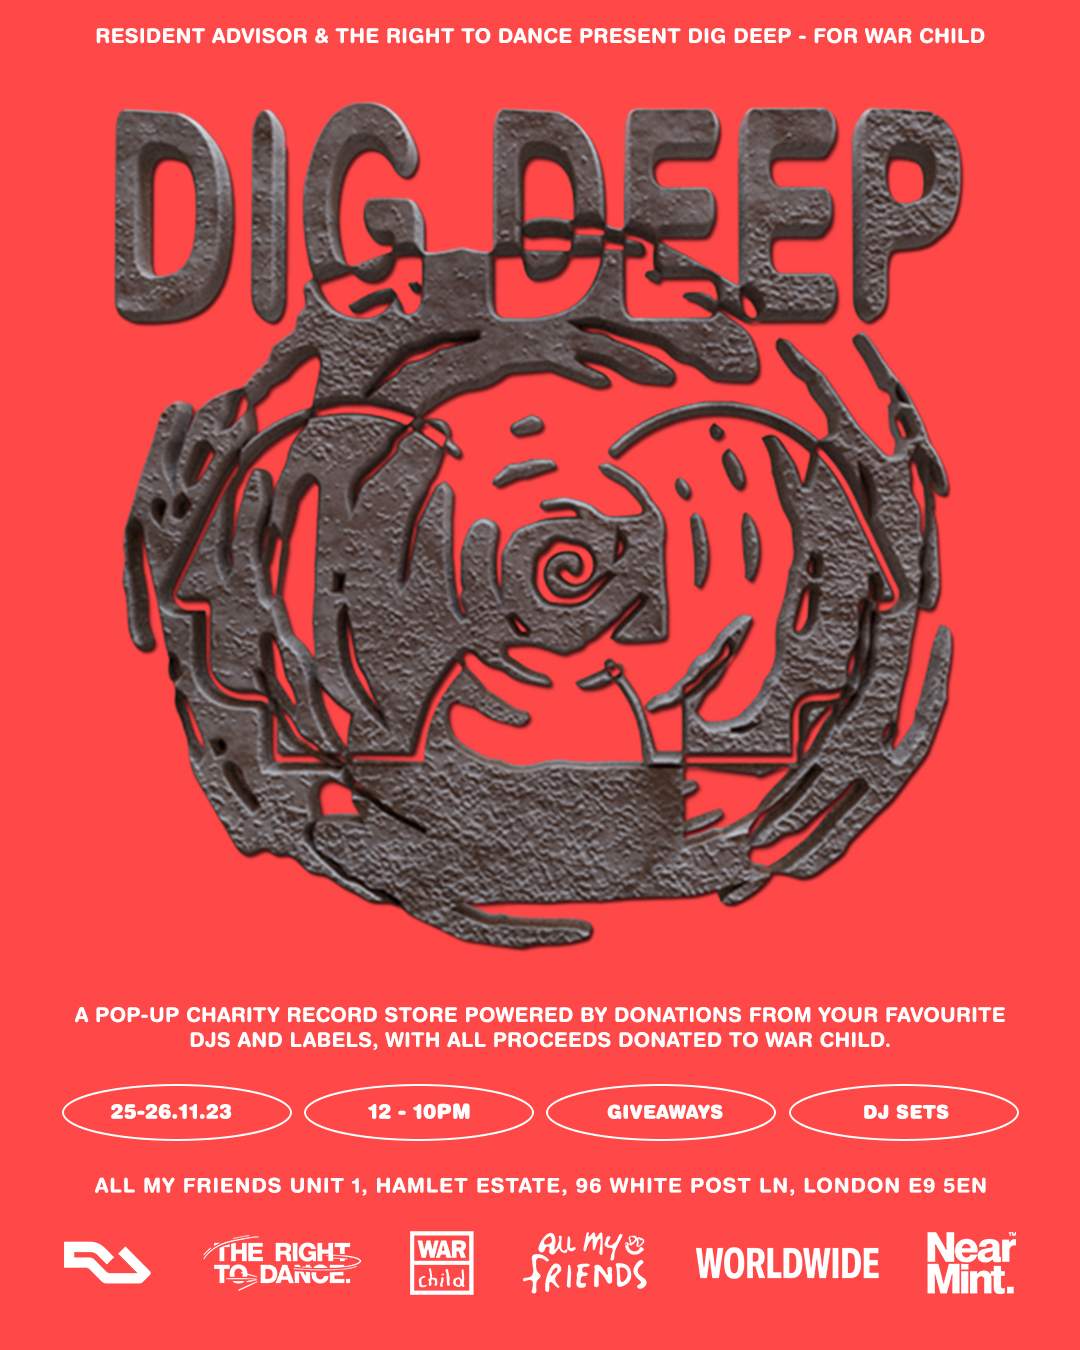 Pop-Up Charity Record Store ‘Dig Deep’ presented by RA and The Right to Dance for War Child - フライヤー表